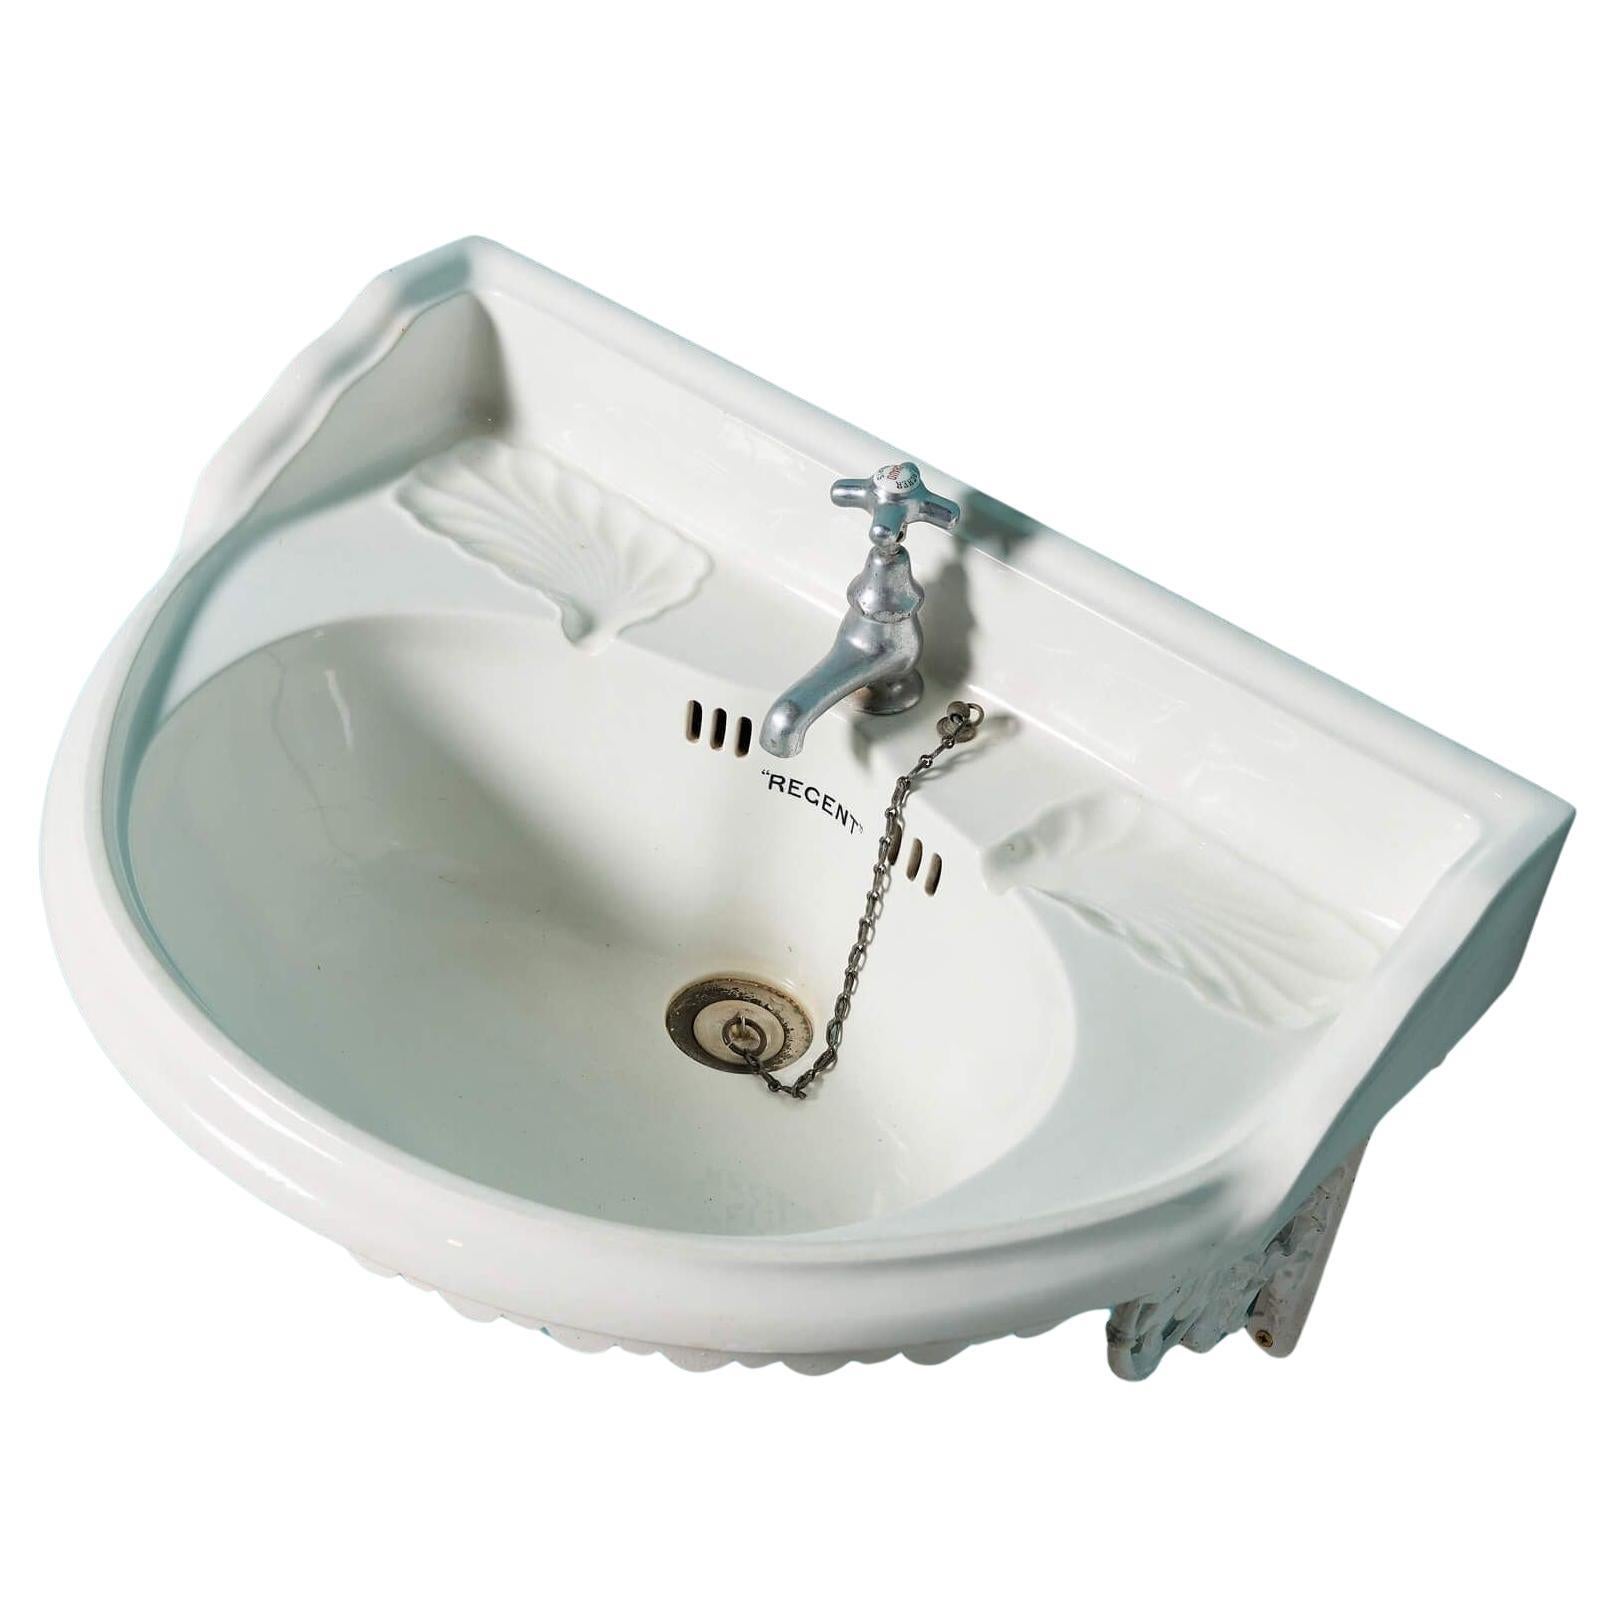 Antique Basin with One Tap & Wall Bracket